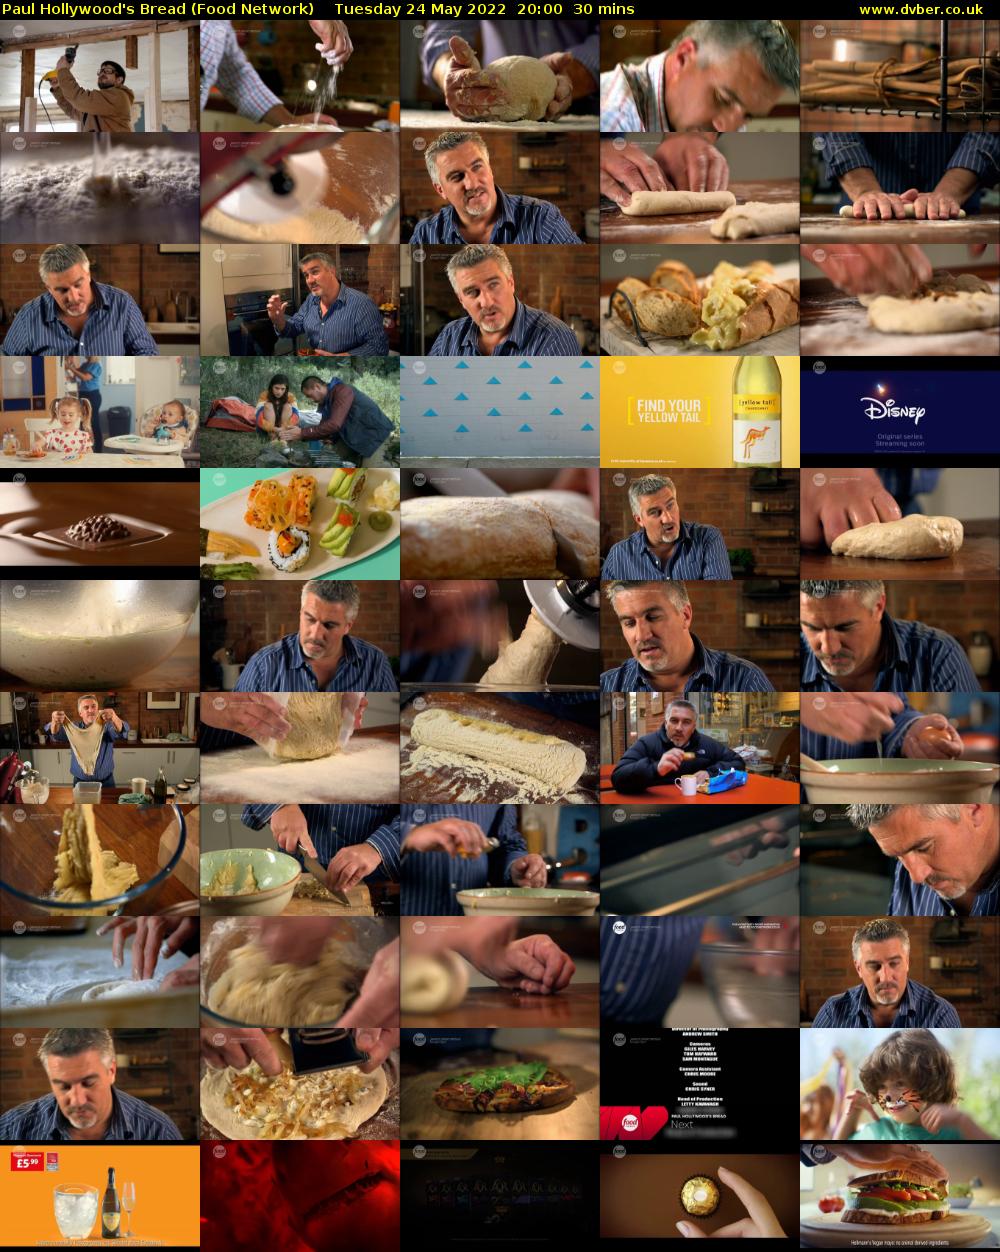 Paul Hollywood's Bread (Food Network) Tuesday 24 May 2022 20:00 - 20:30